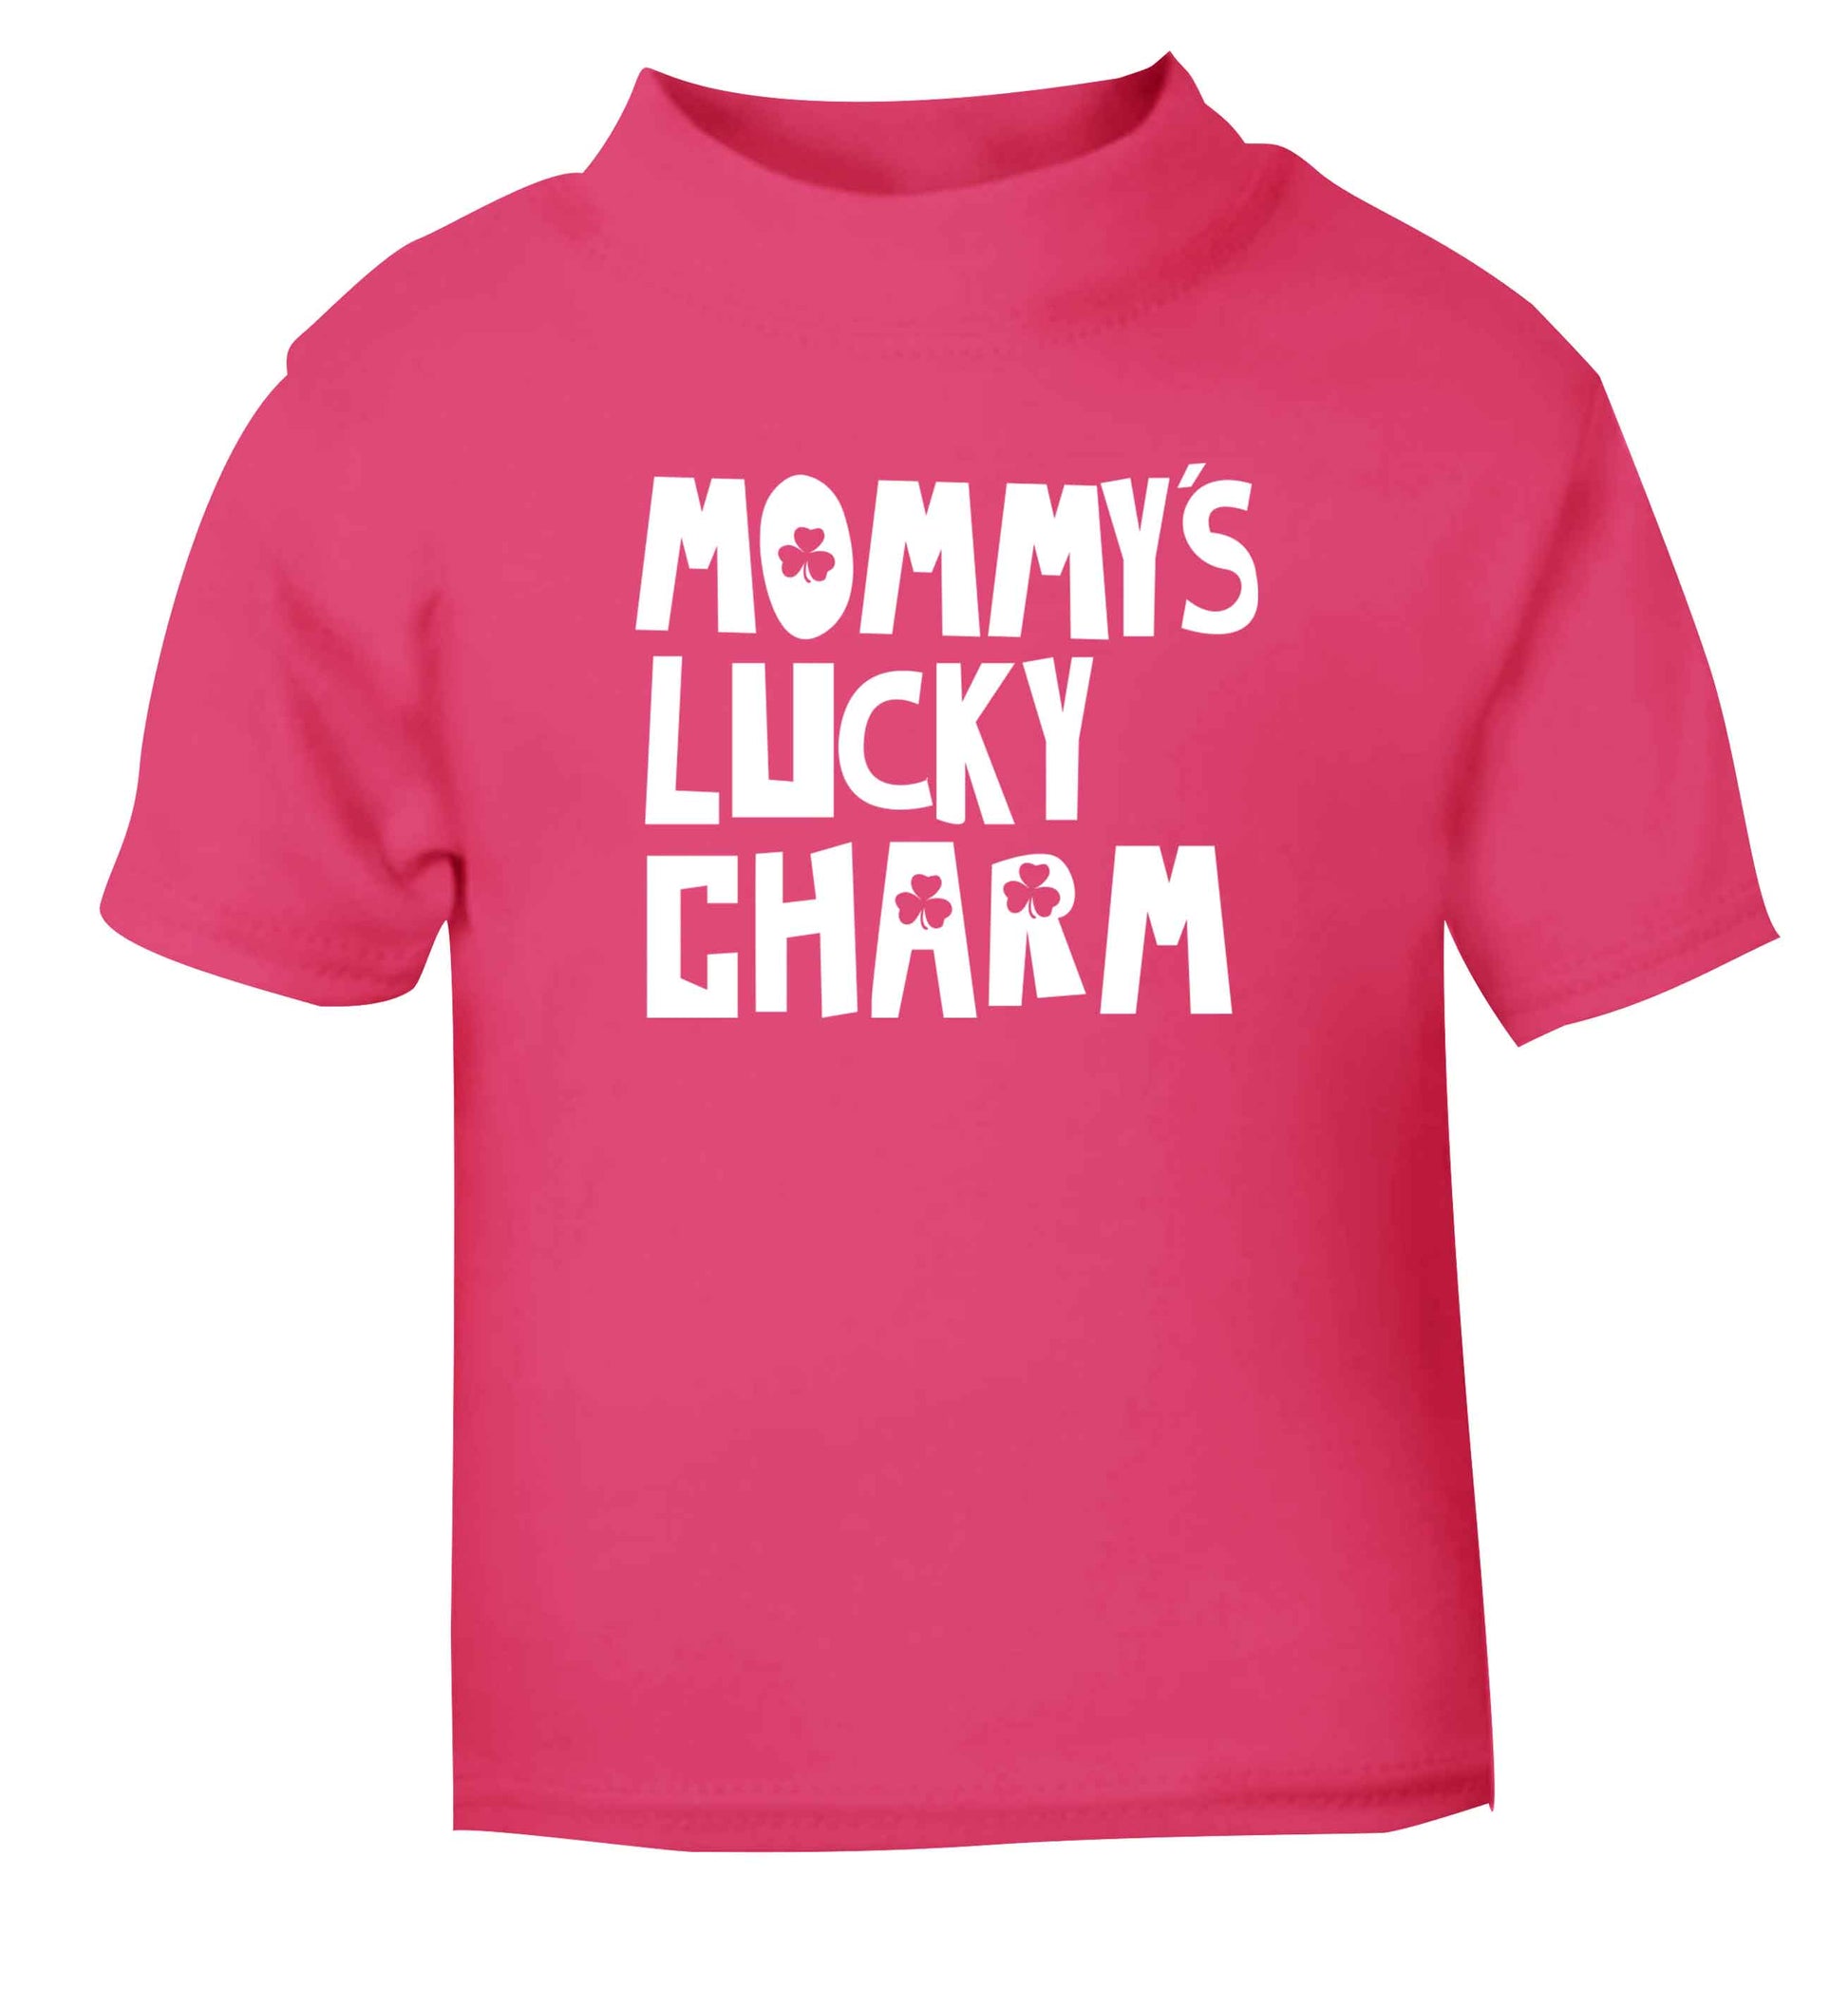 Mommy's lucky charm pink baby toddler Tshirt 2 Years